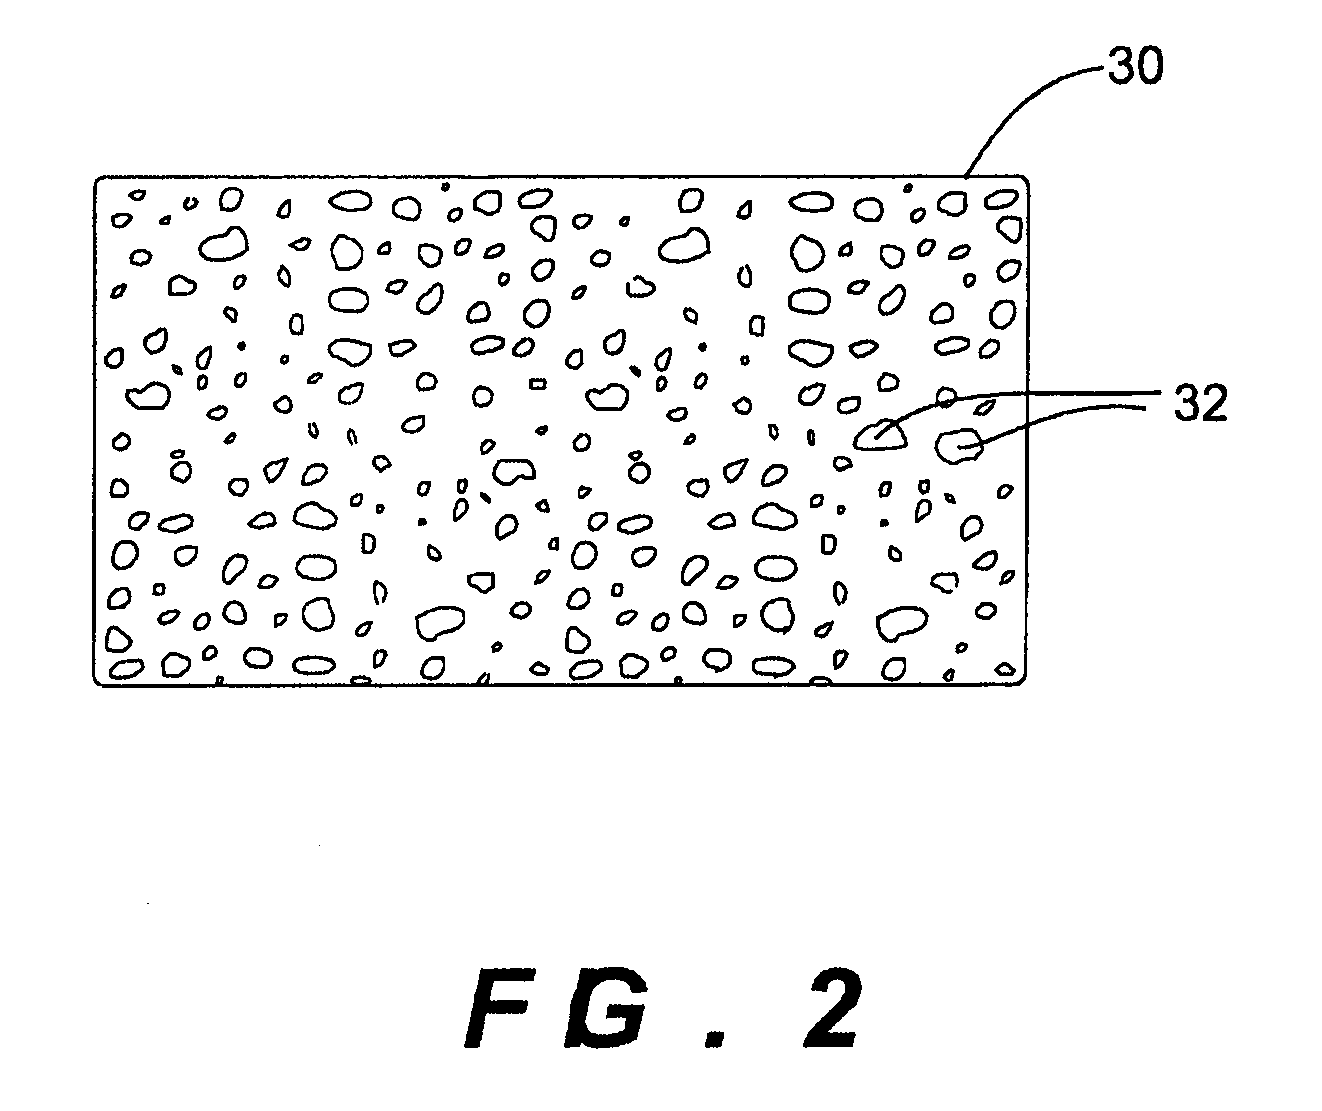 Battery including electrically conductive phosphate glass components